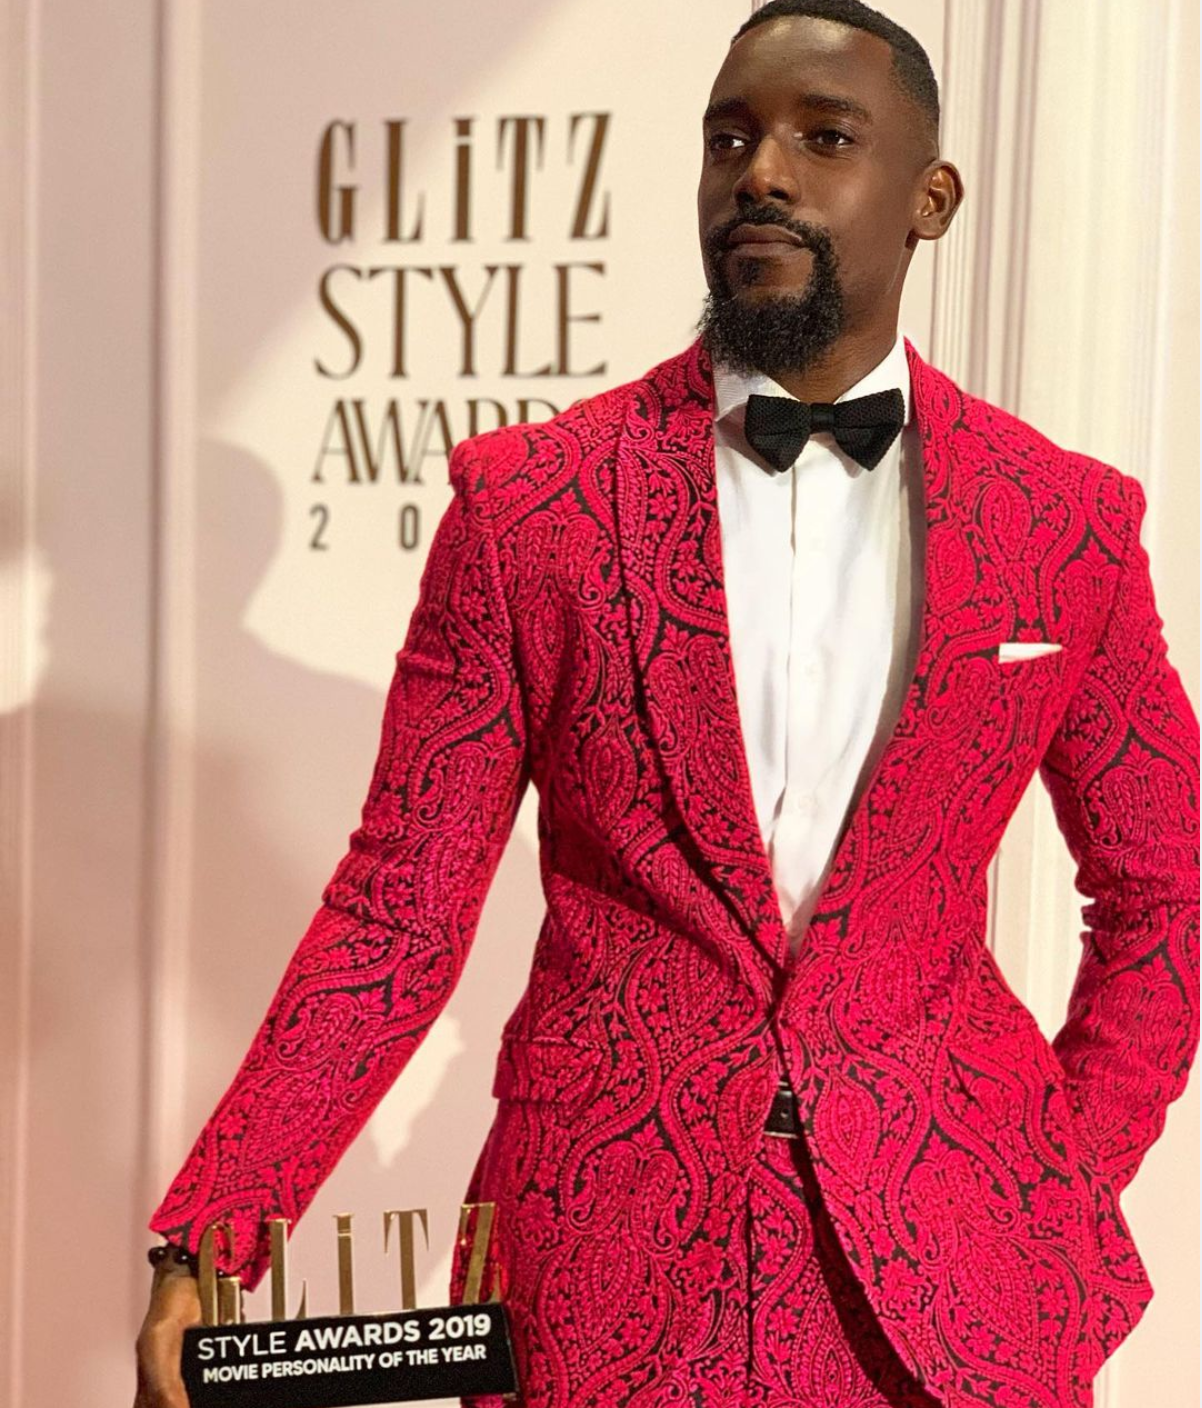 Most Fashionable Male Celebrities in Ghana